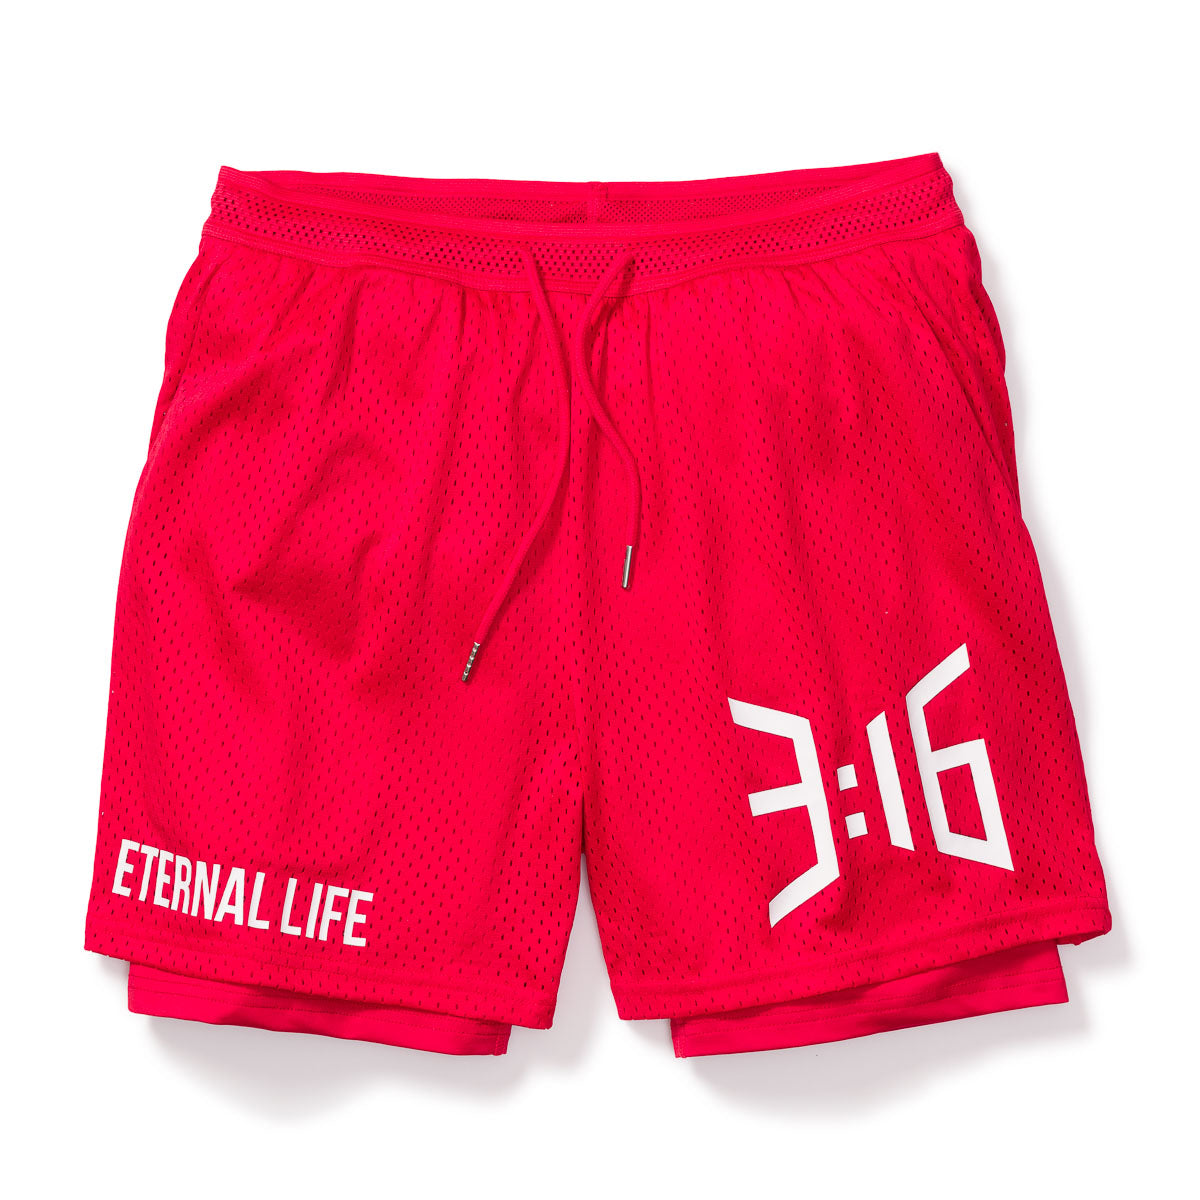 3:16 Eternal Life - Double Layer Athletic Short - Red - 316collection